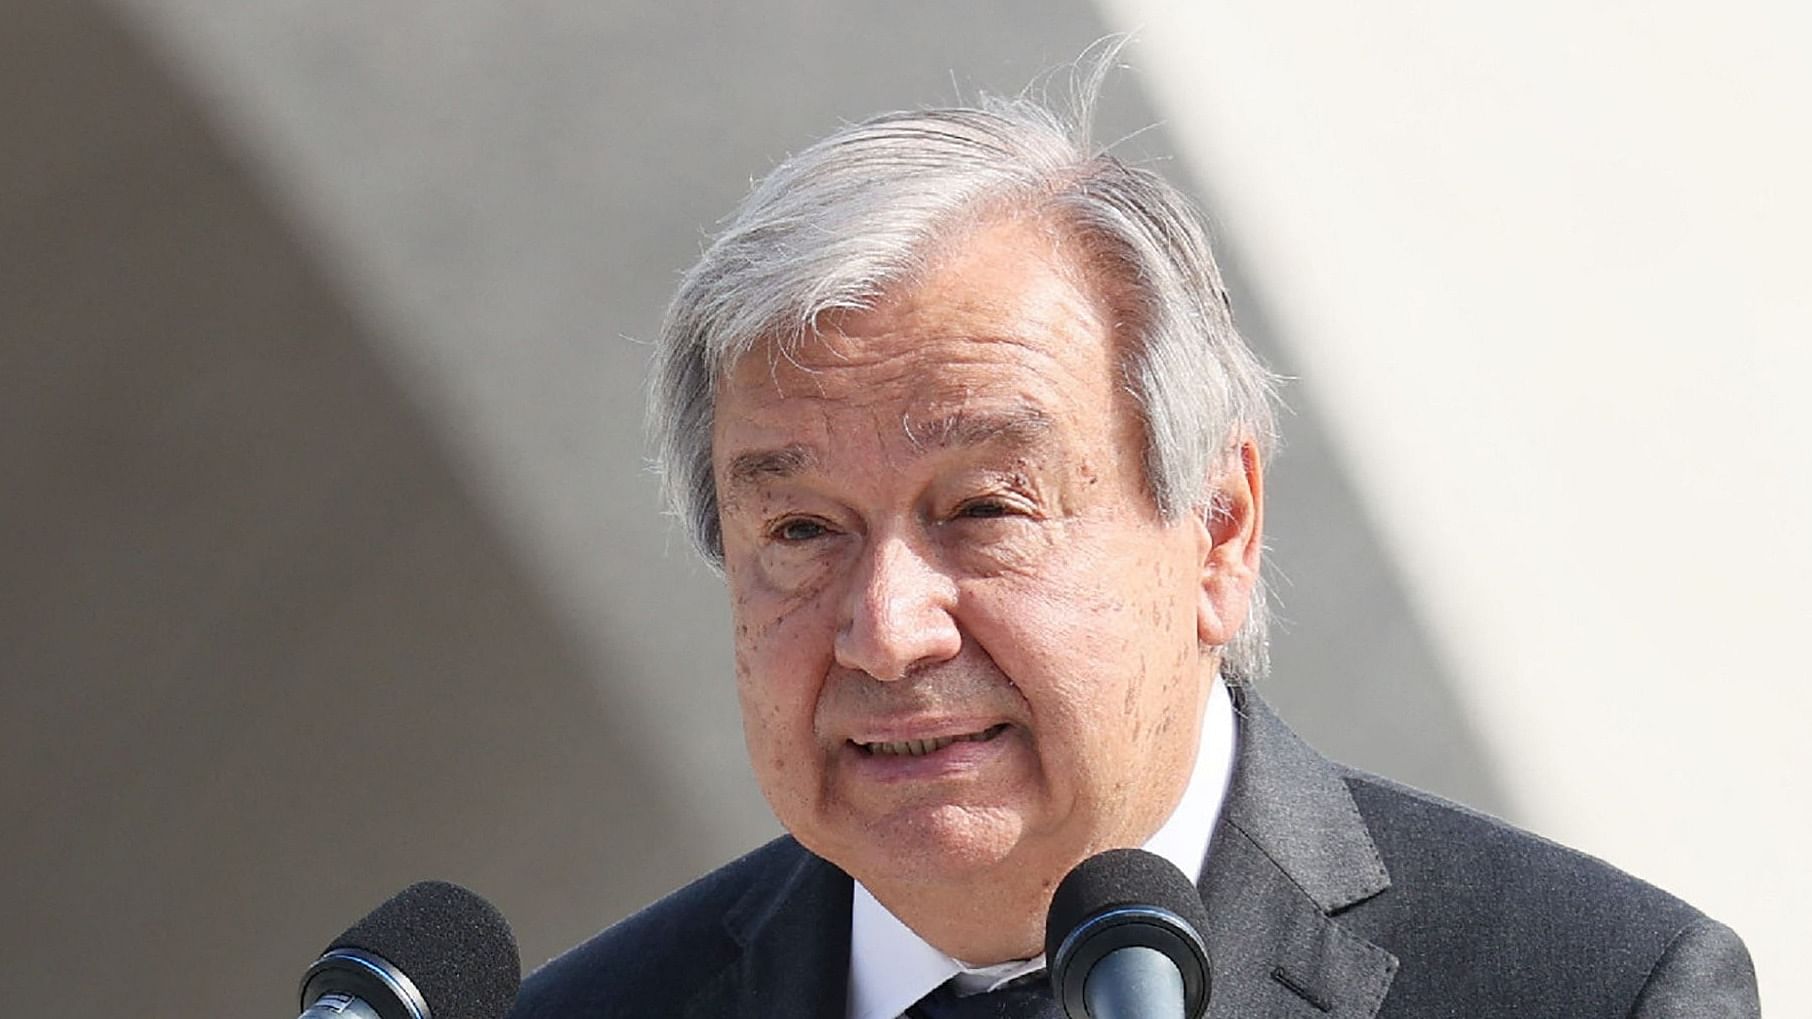 UN Secretary General António Guterres speaks during the annual memorial ceremony at the Hiroshima Peace Memorial Park in Hiroshima on August 6, 2022, to mark 77 years since the world's first atomic bomb attack. Credit: JIJI PRESS / AFP / Japan OUT Photo